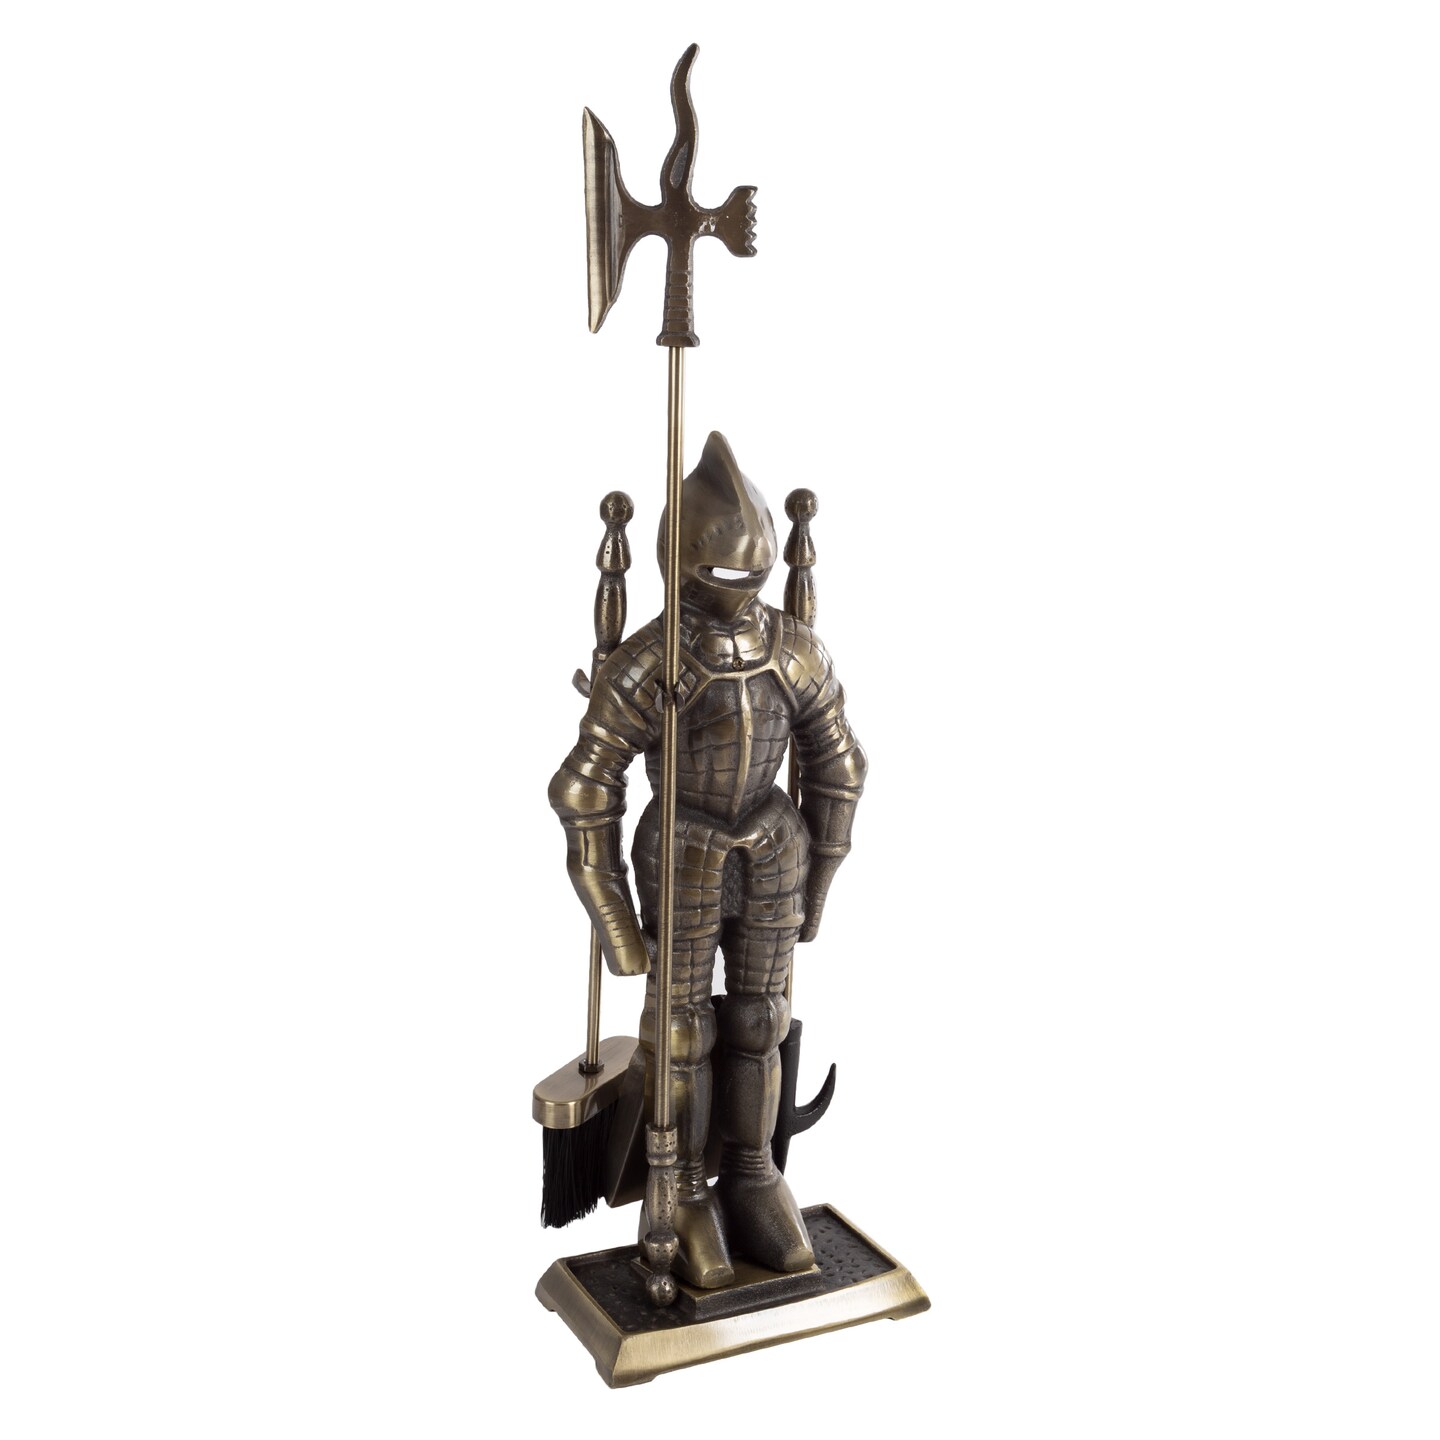 Lavish Home Fireplace Tool Set- Medieval Knight Cast Iron Statue Holds Heavy Duty Essential Tools